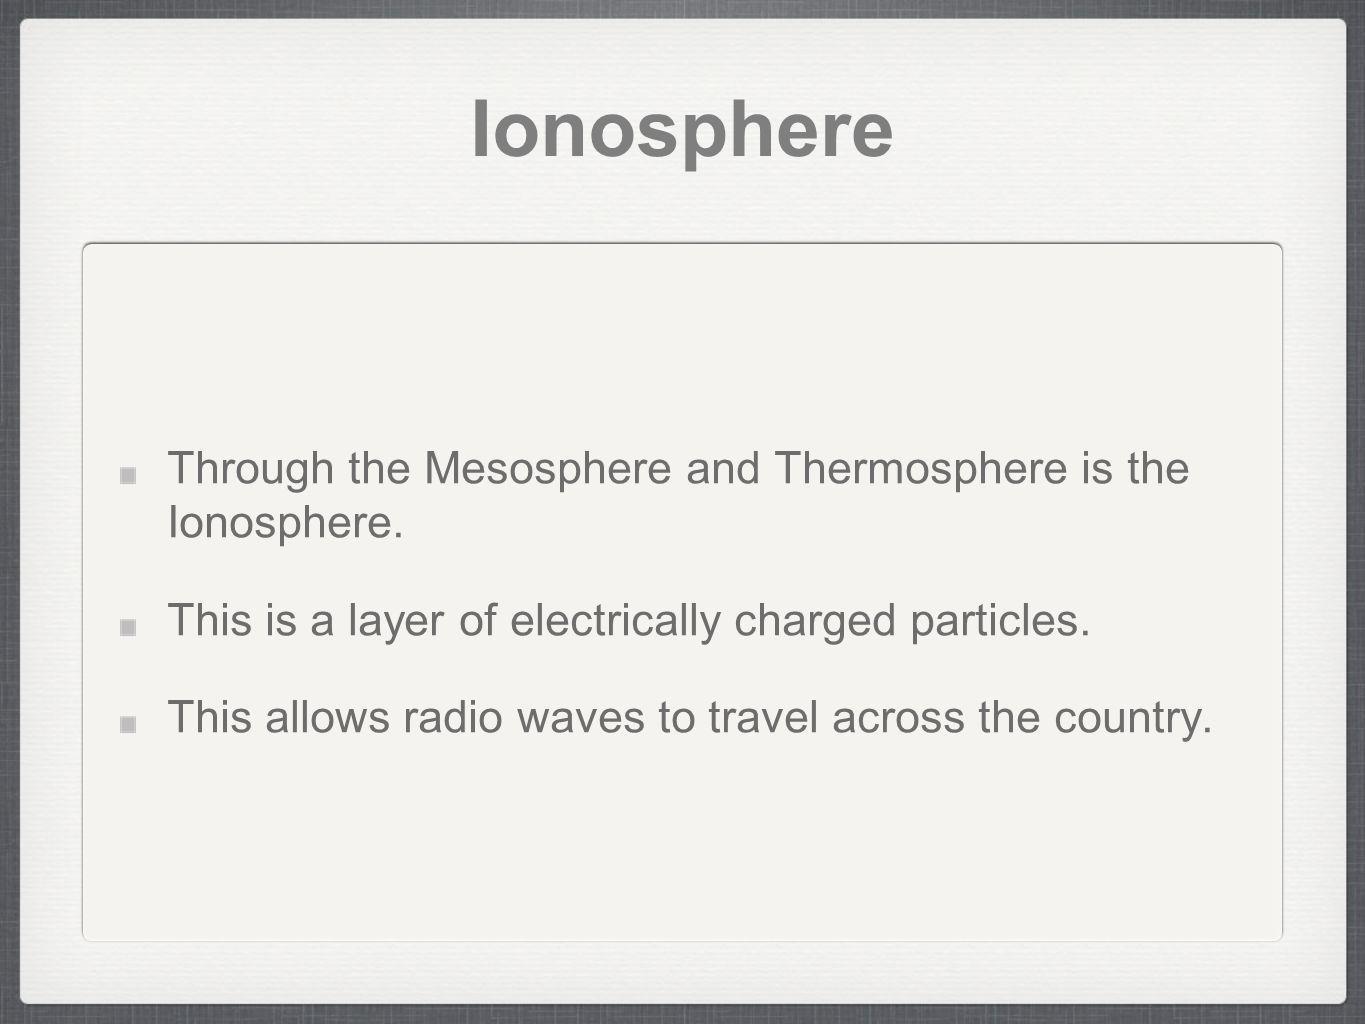 Ionosphere Through the Mesosphere and Thermosphere is the Ionosphere.